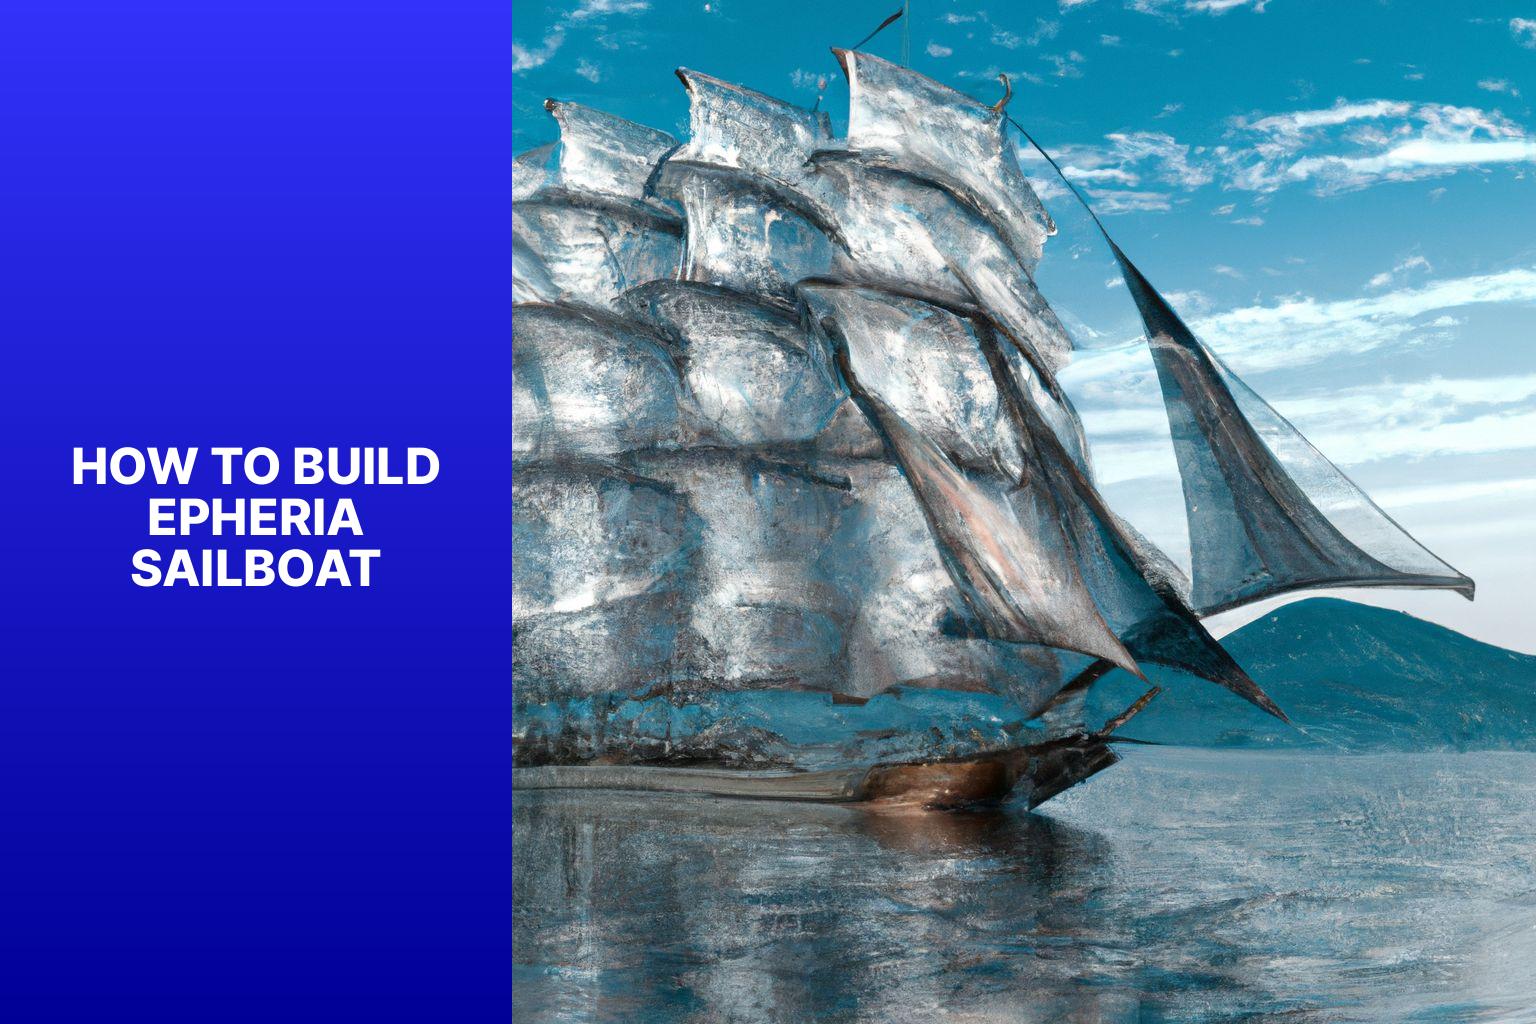 Step-by-Step Guide: Build Epheria Sailboat for Seafaring Adventures